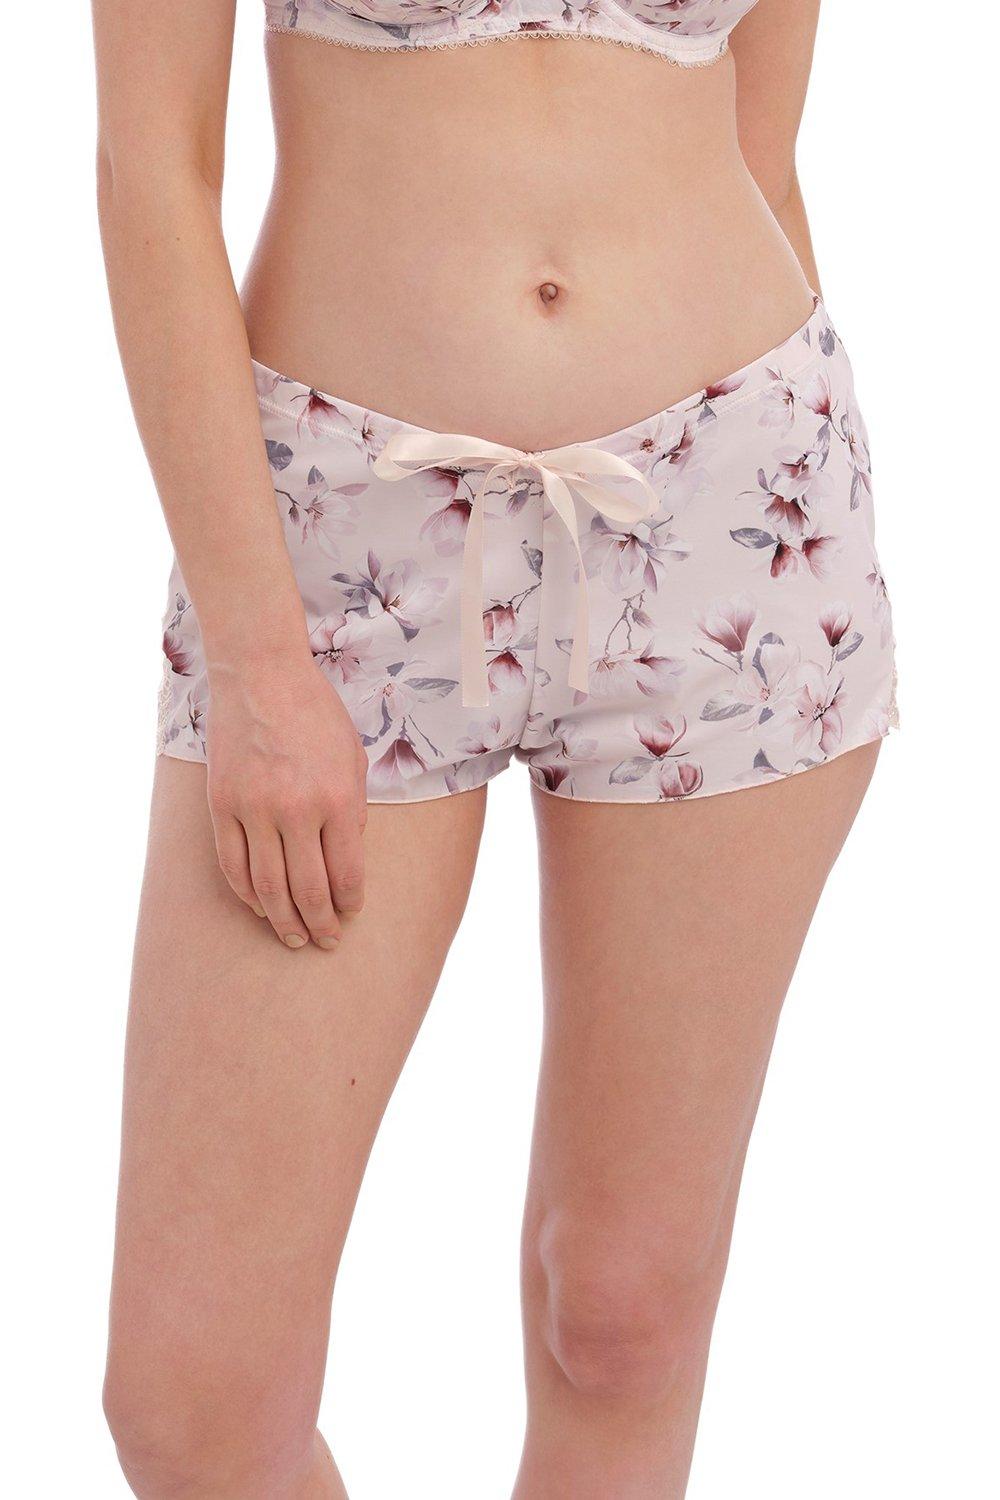 Lucia French Knicker